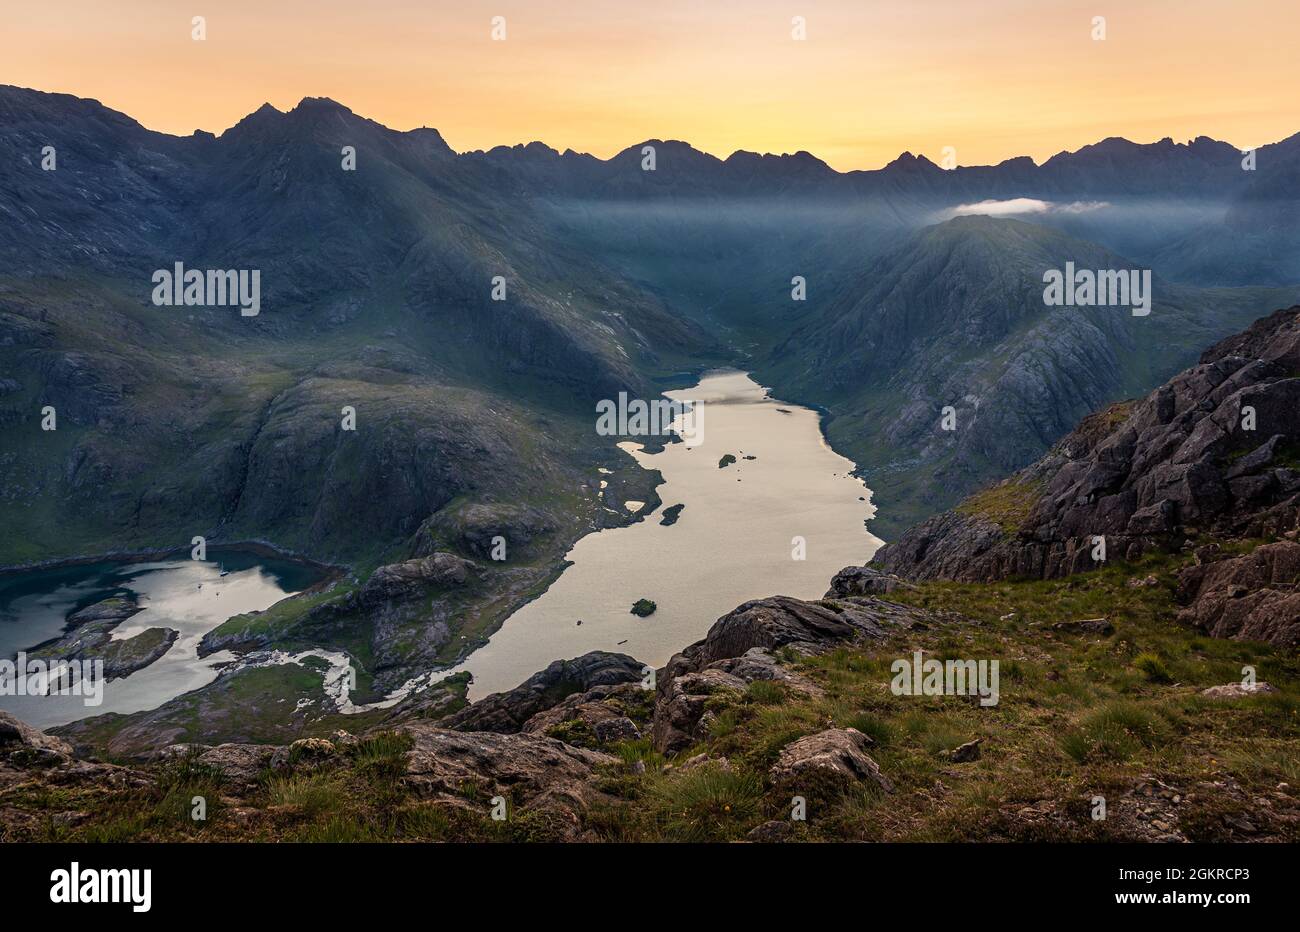 The sun setting behind the Black Cuillin Ridge with the remote Loch Coruisk in the glen below, Isle of Skye, Inner Hebrides, Scotland, United Kingdom Stock Photo